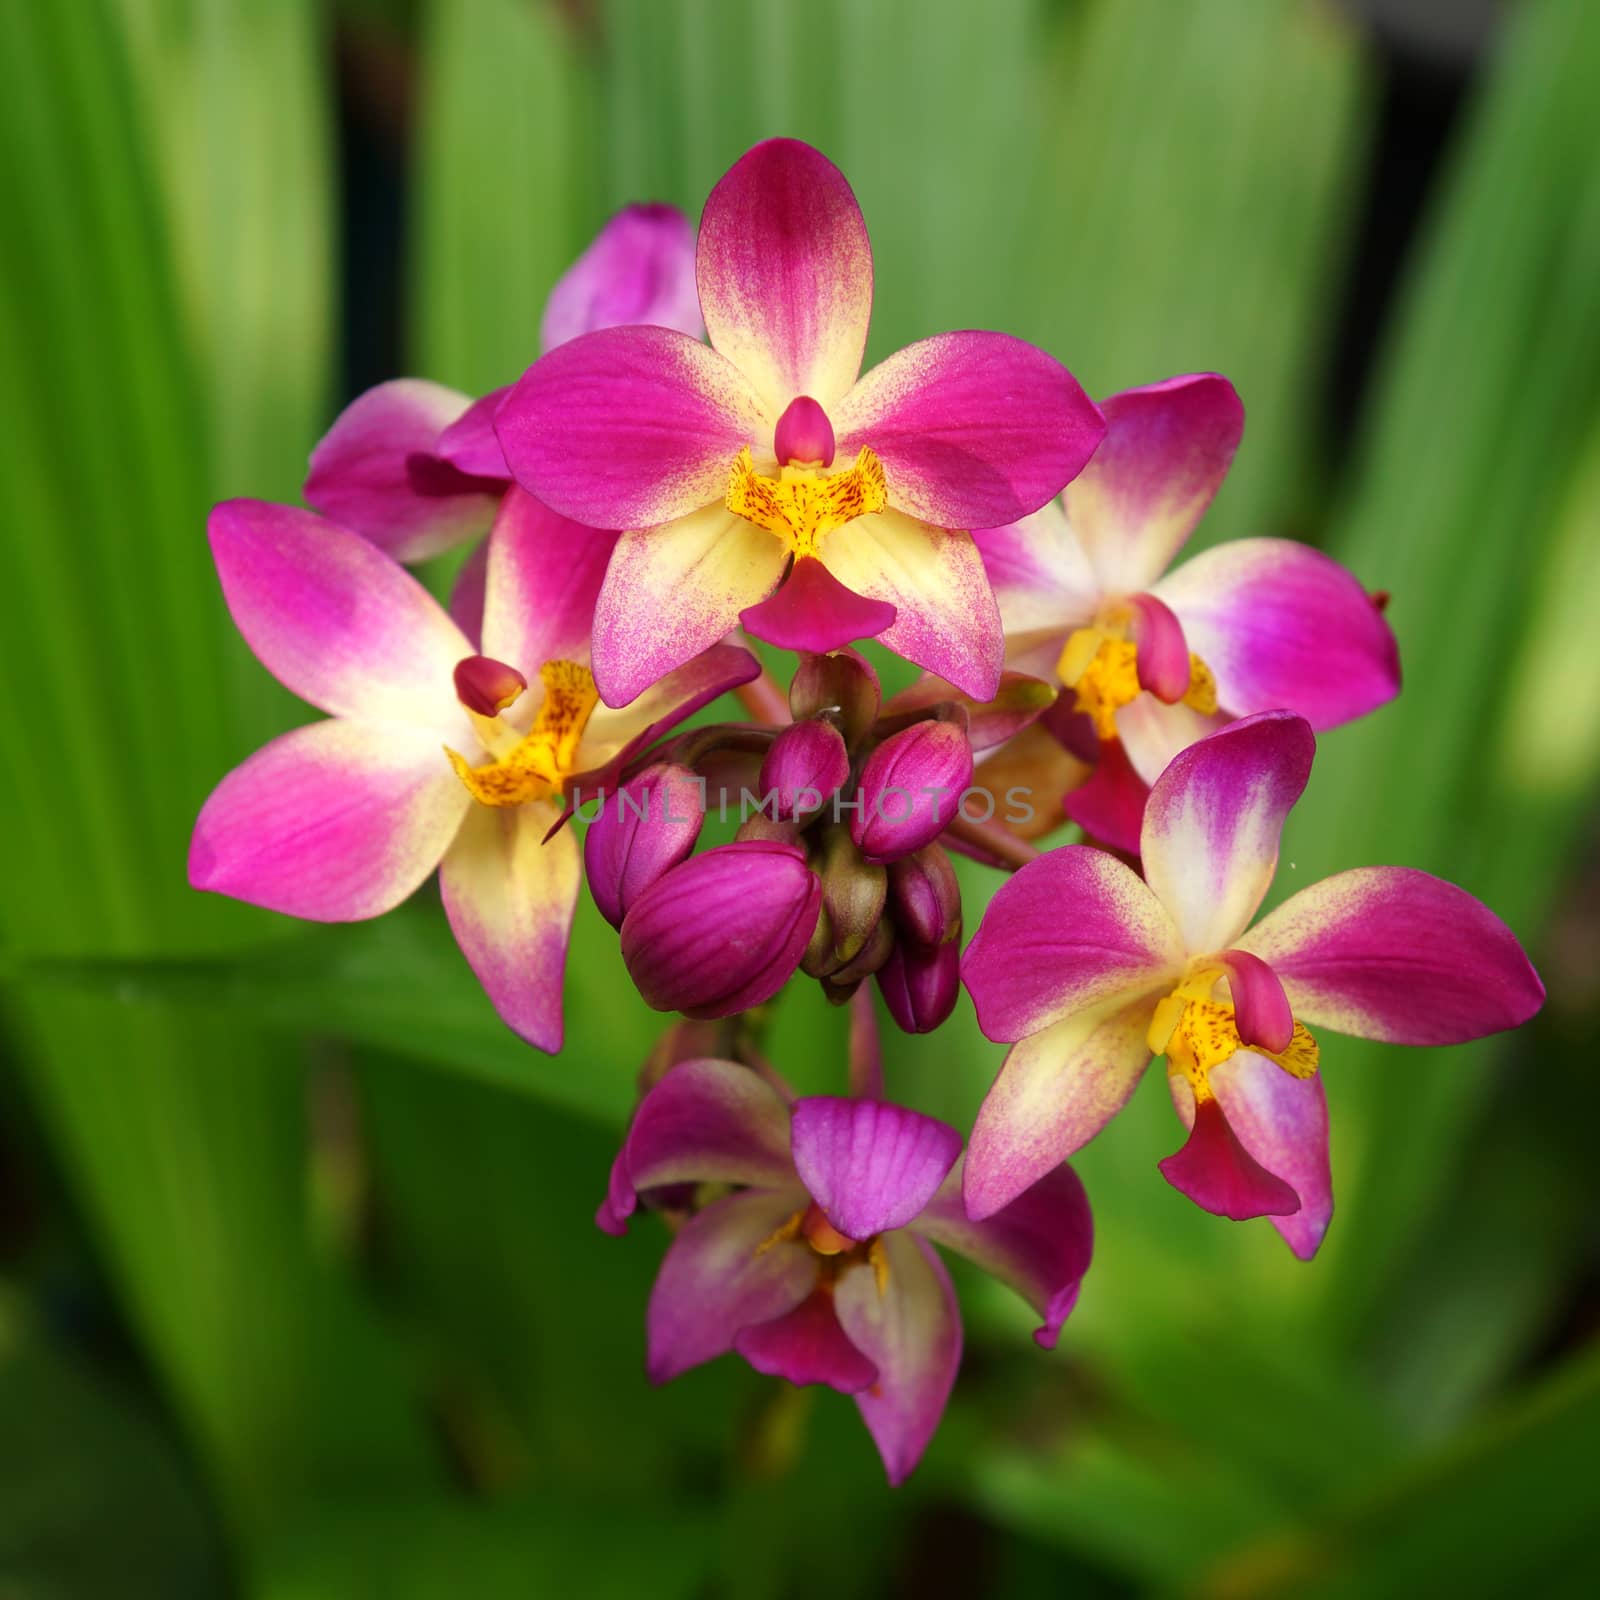 ground orchid flowers in the tropical rain forest by Noppharat_th